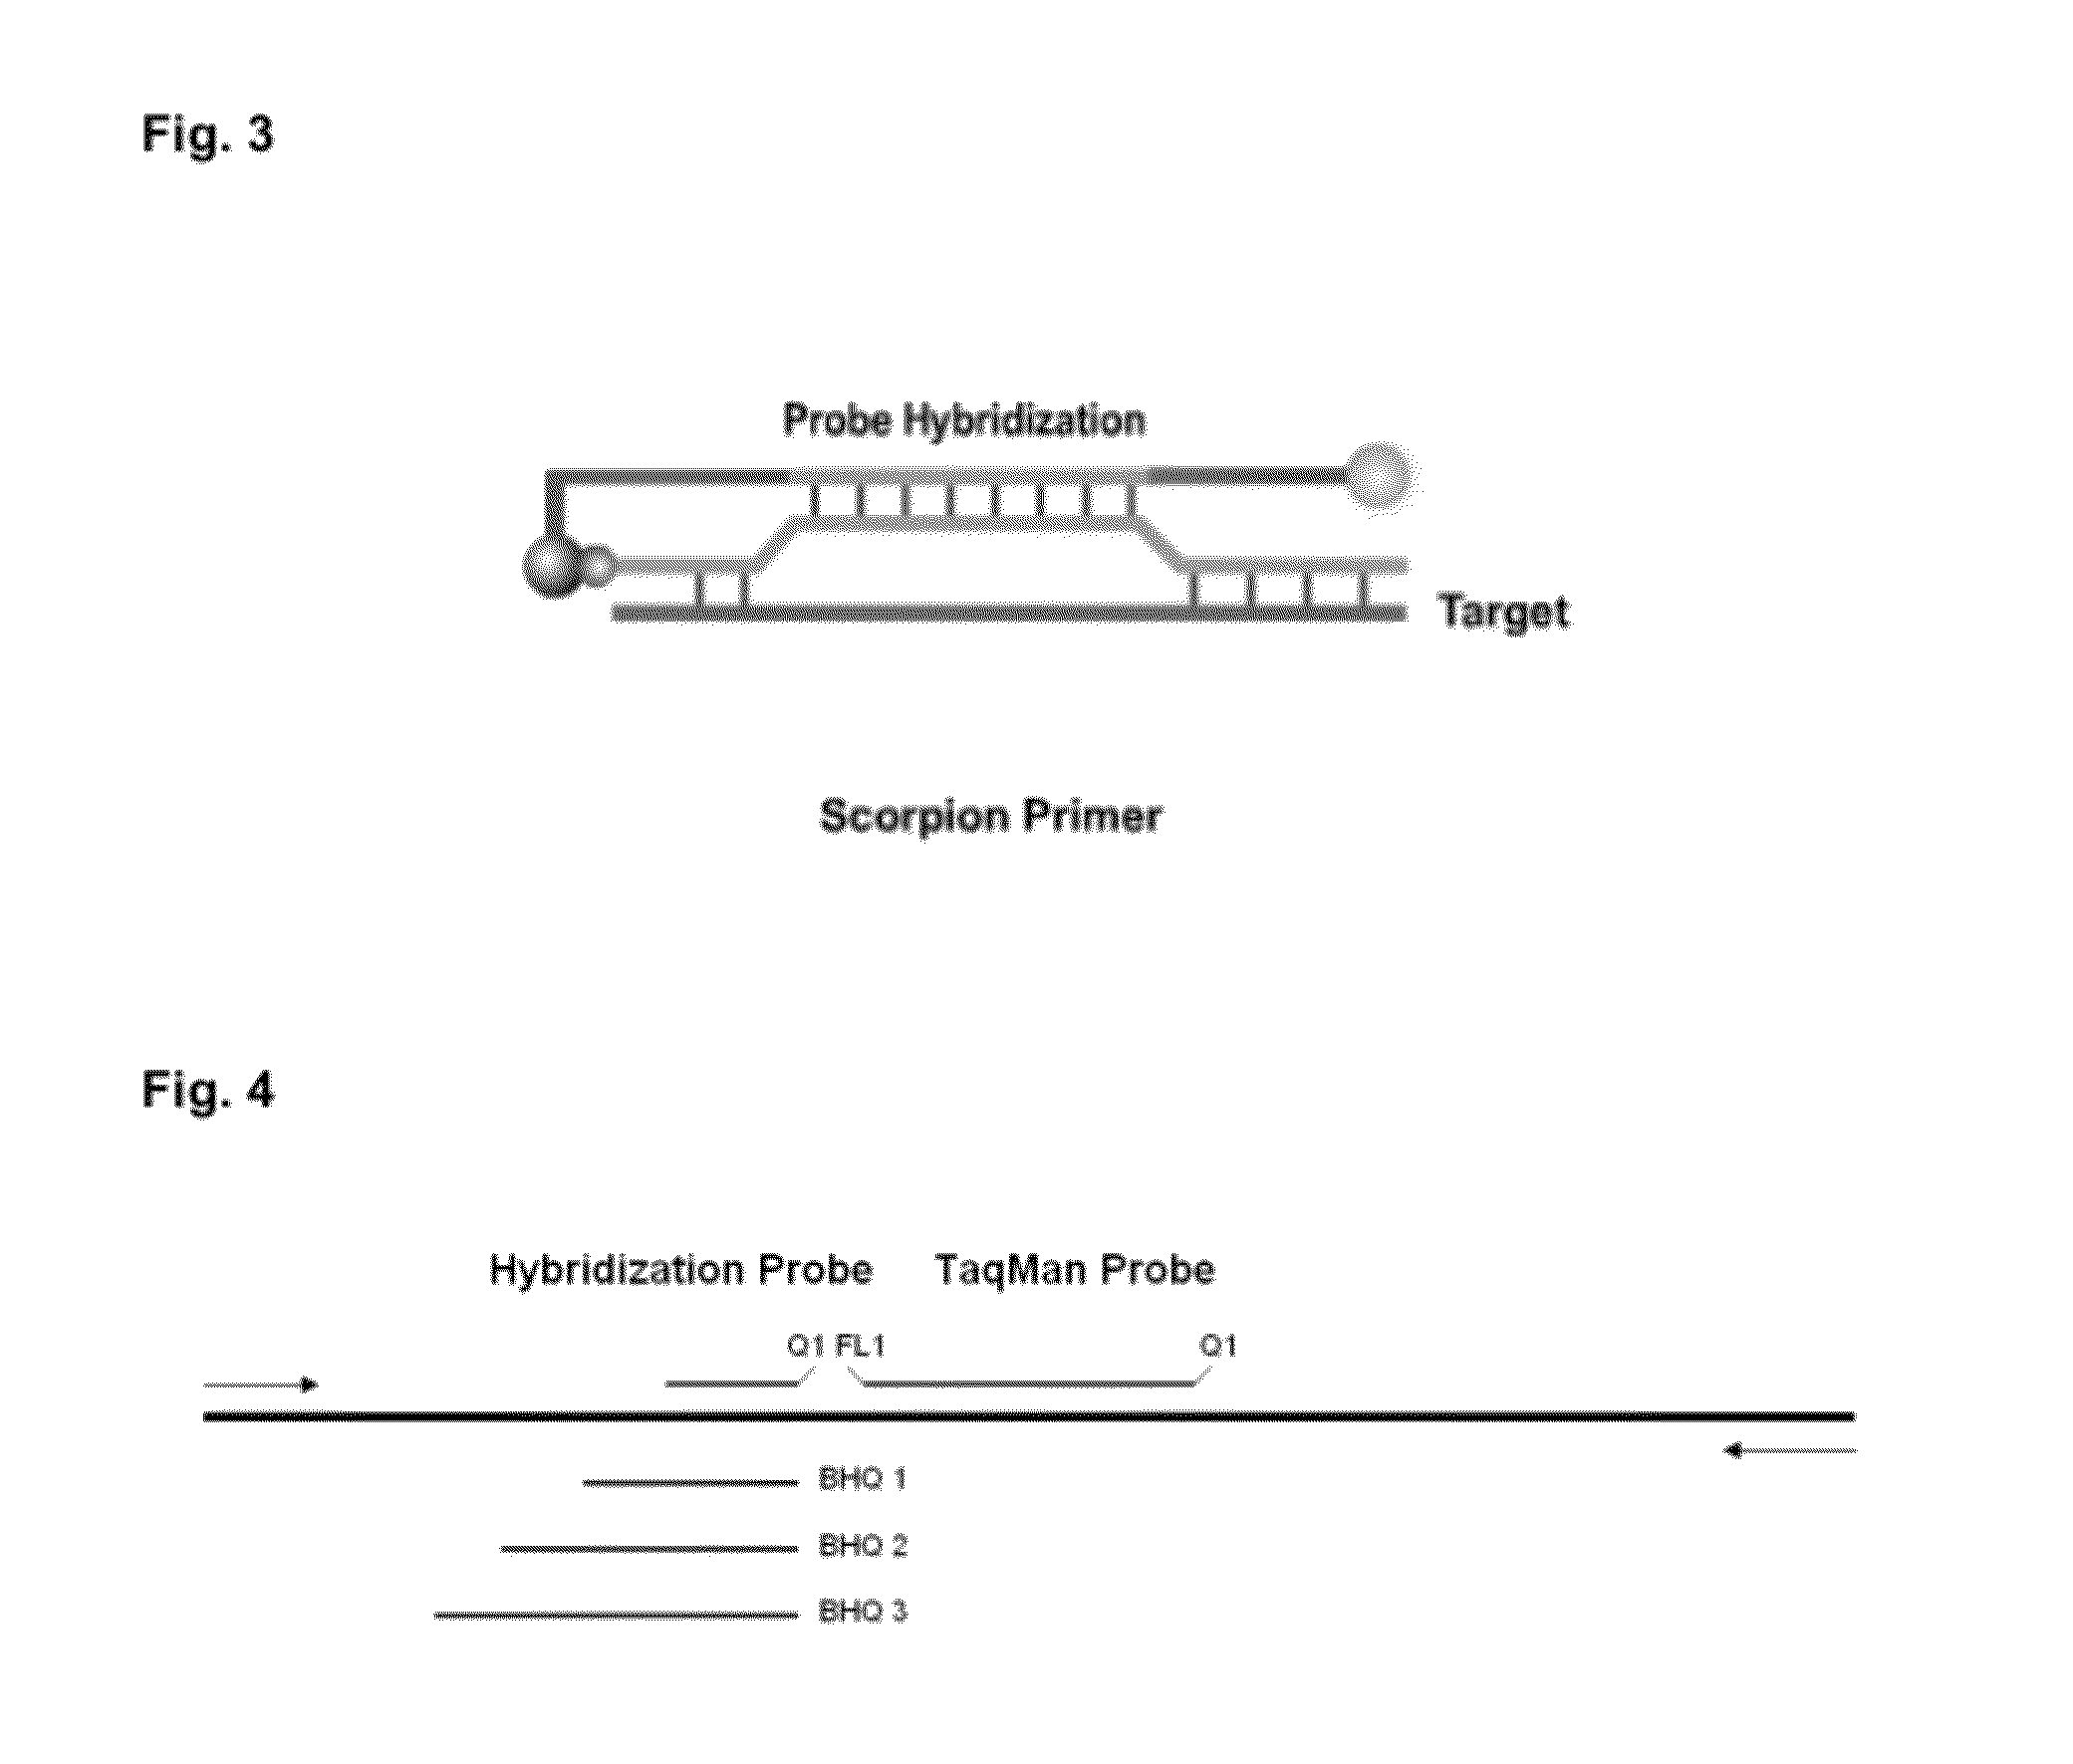 Detection of multiple nucleic acid sequences in a reaction cartridge